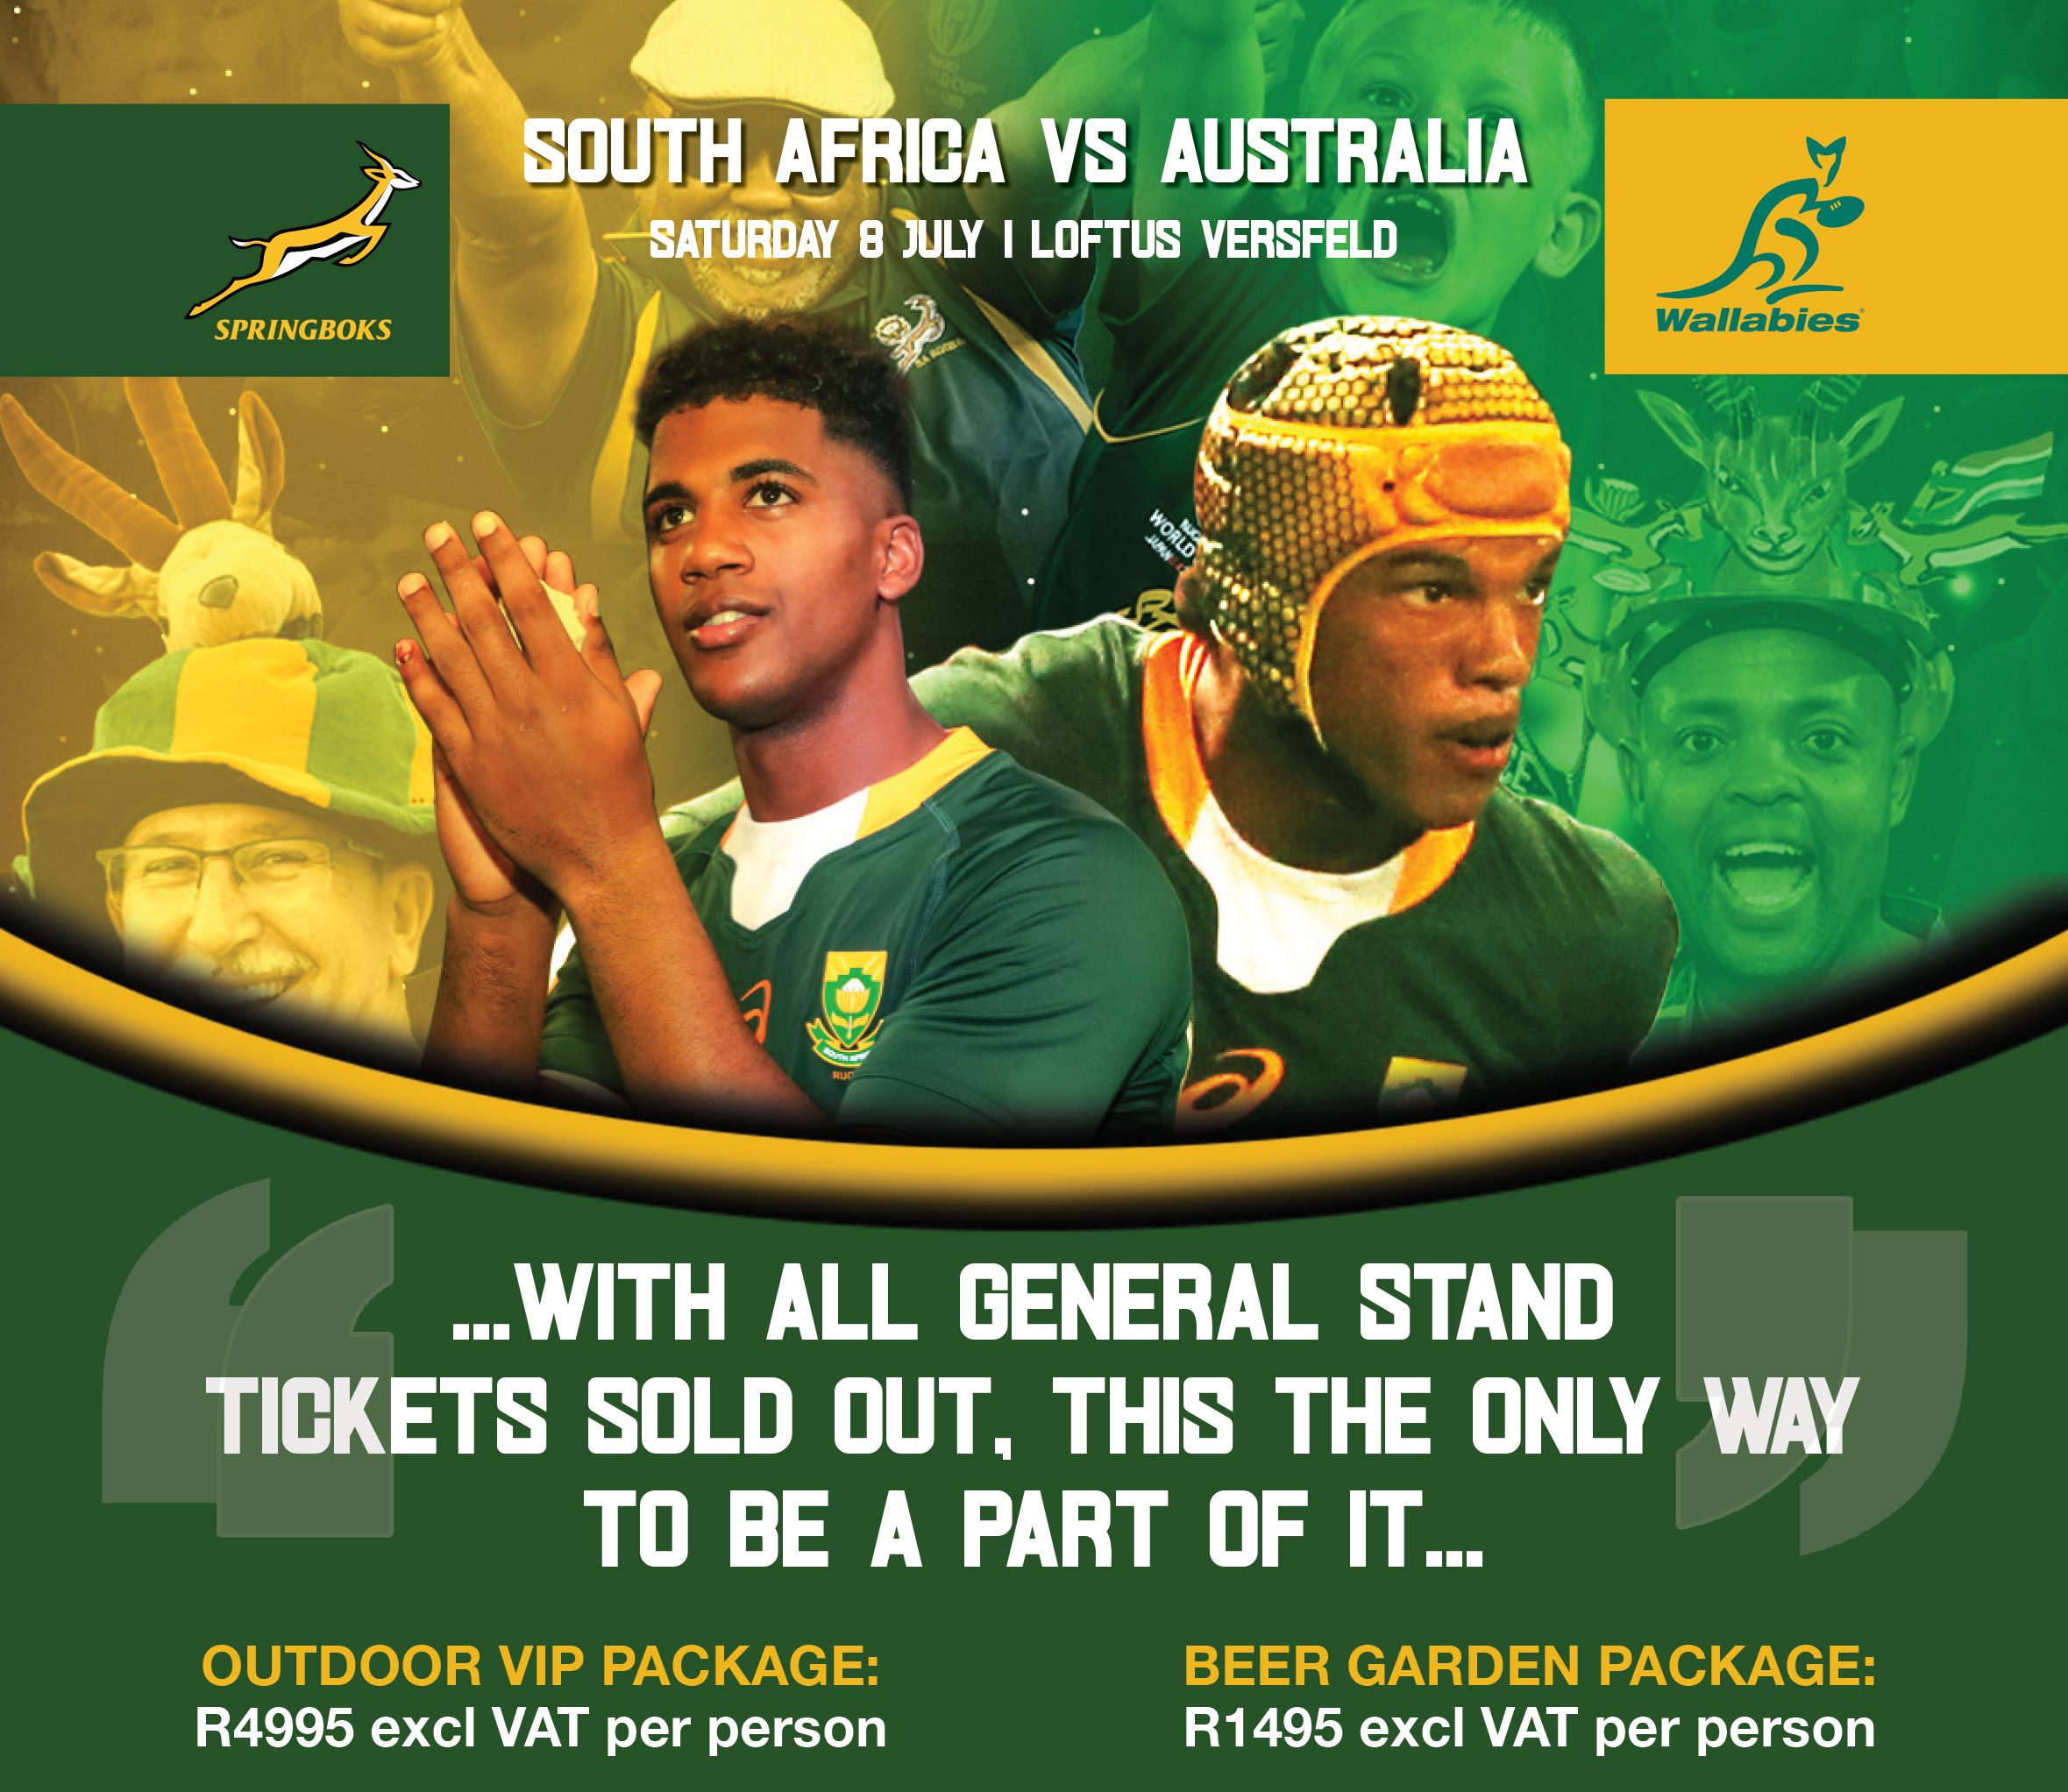 SPRINGBOKS v AUSTRALIA, THE ONLY WAY TO BE PART OF IT